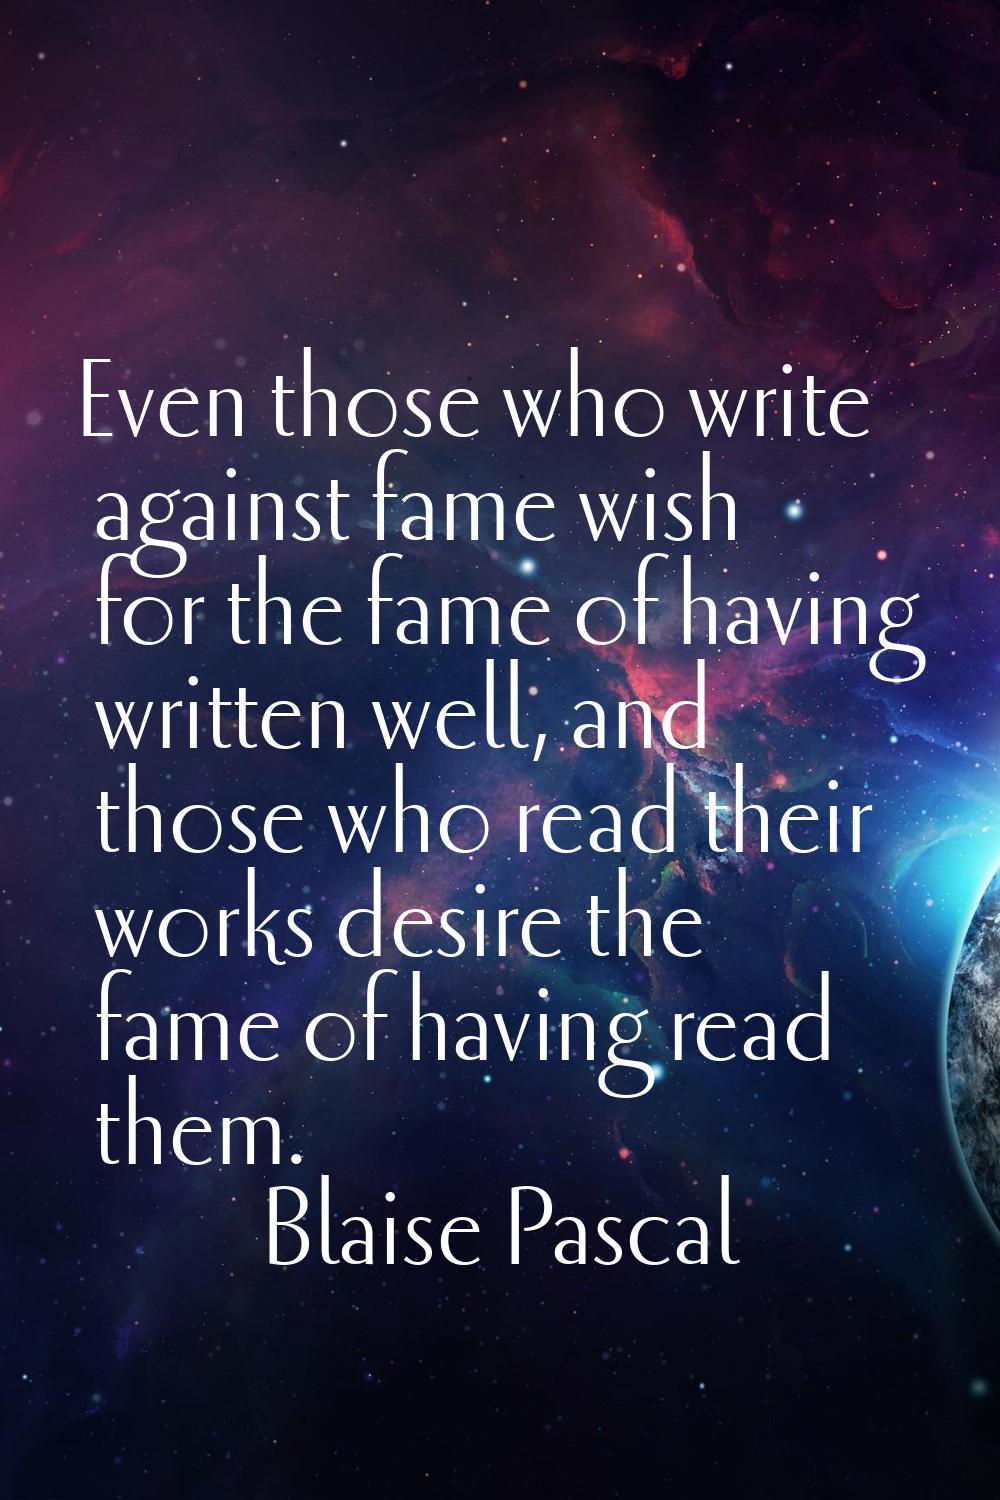 Even those who write against fame wish for the fame of having written well, and those who read thei